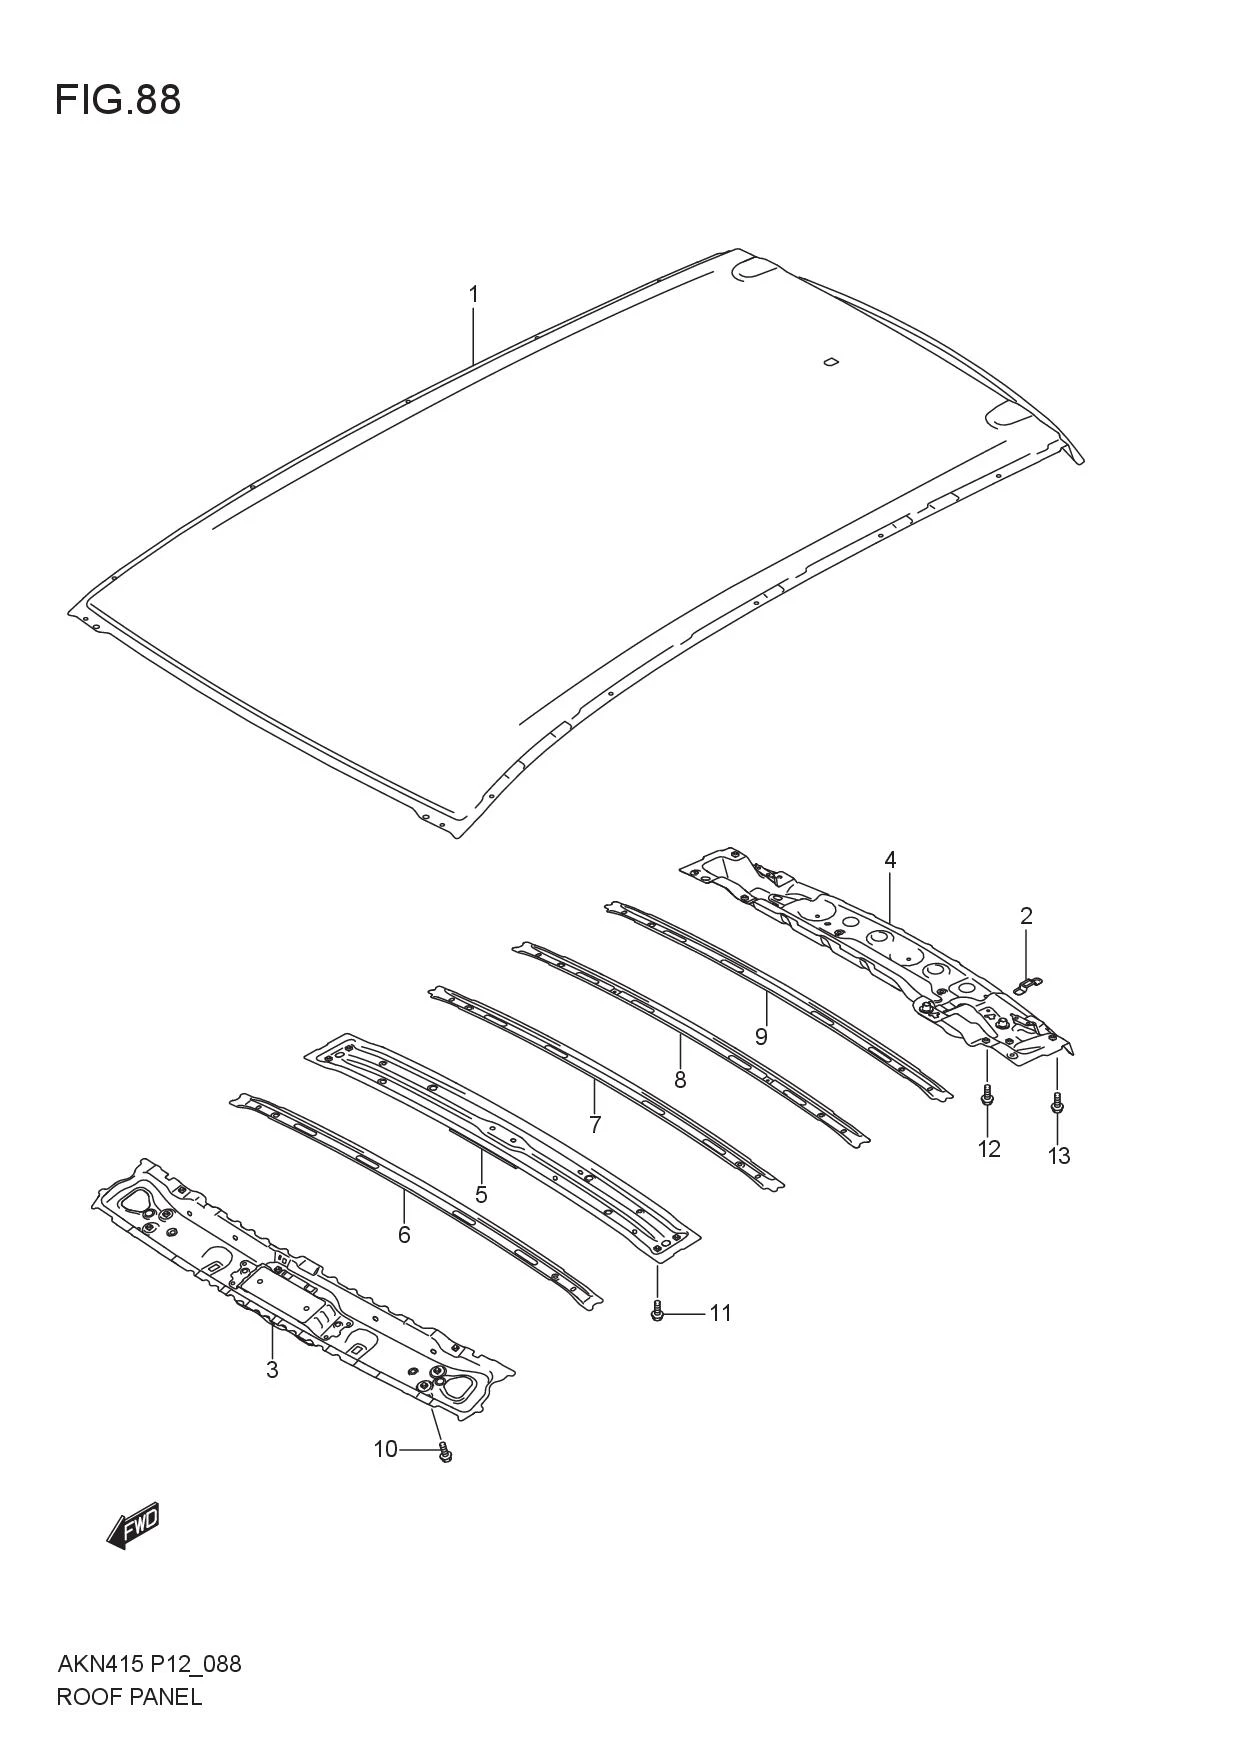 FIG.88 ROOF PANEL